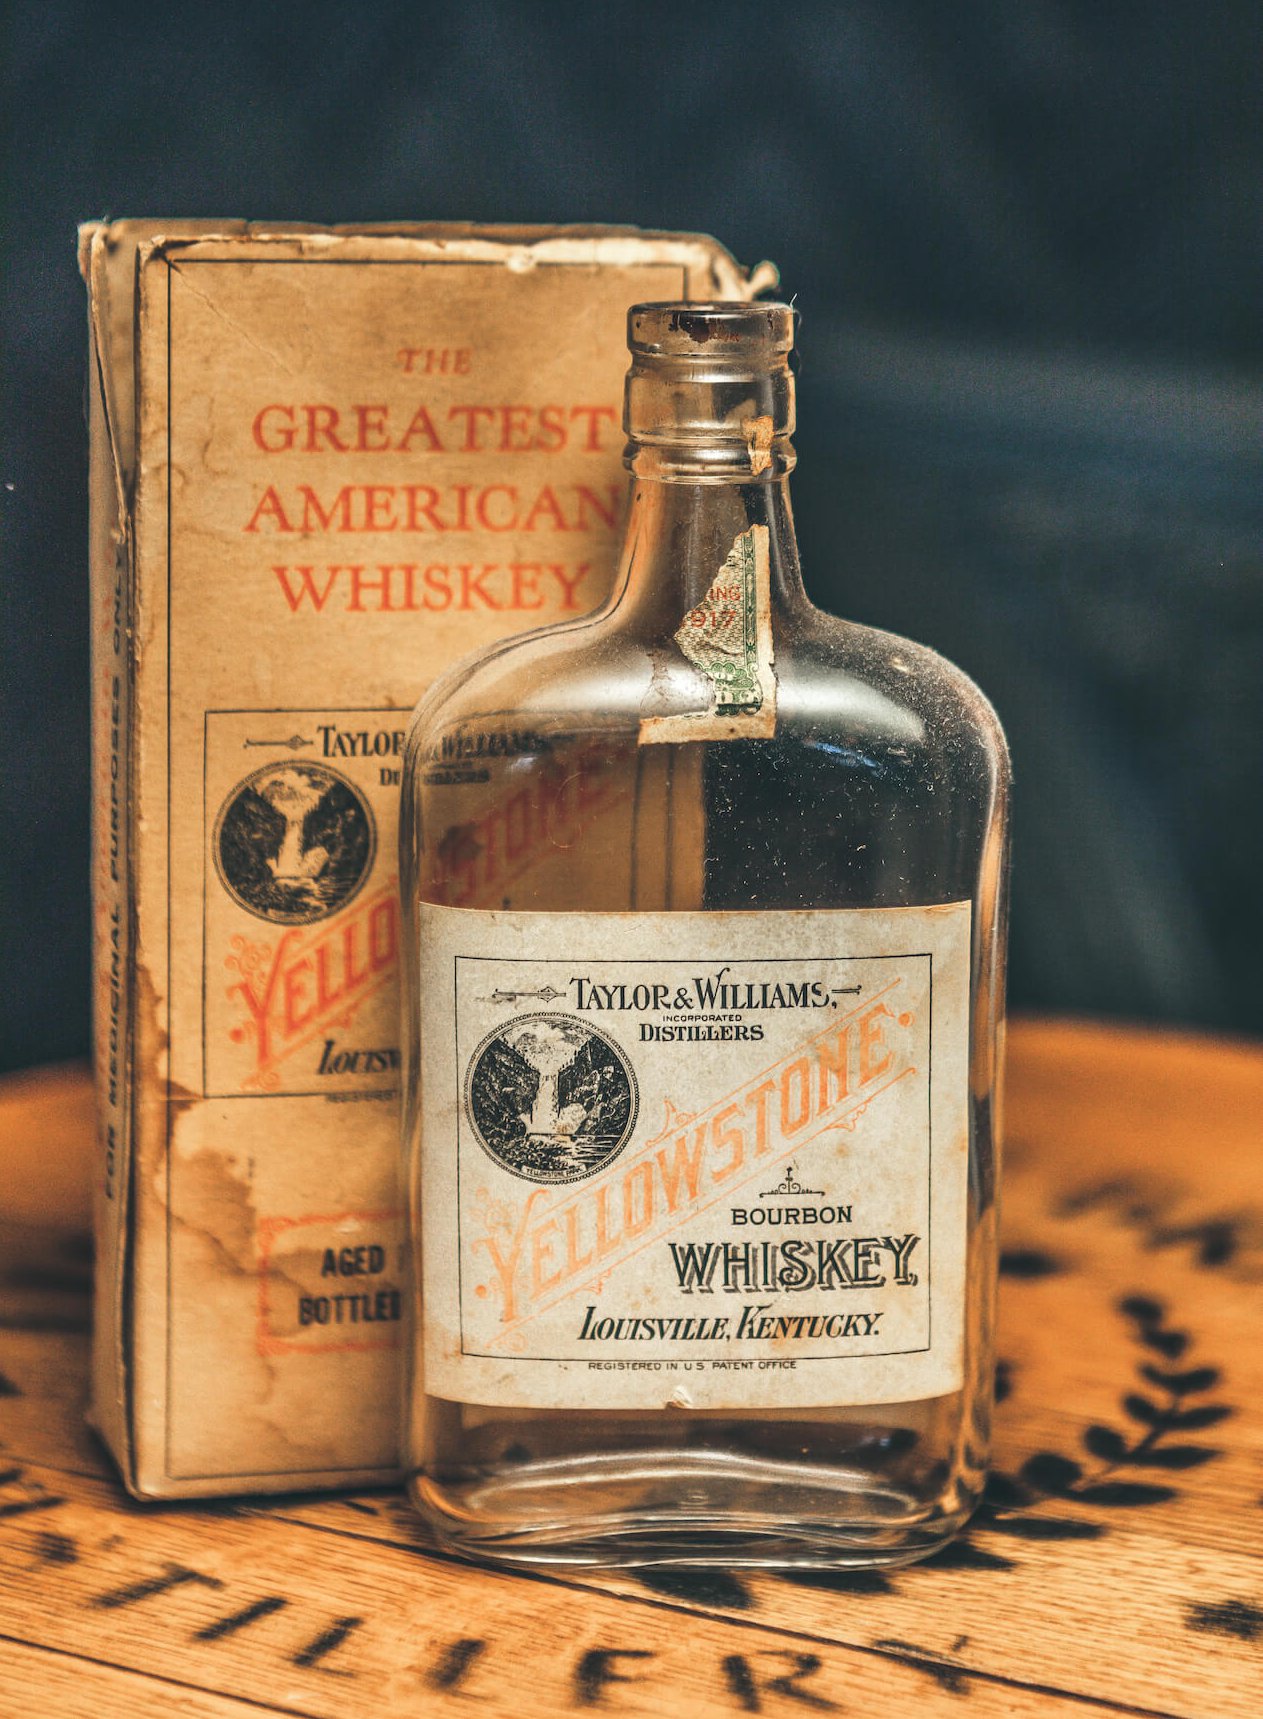 An old bottle of whiskey with a book behind it